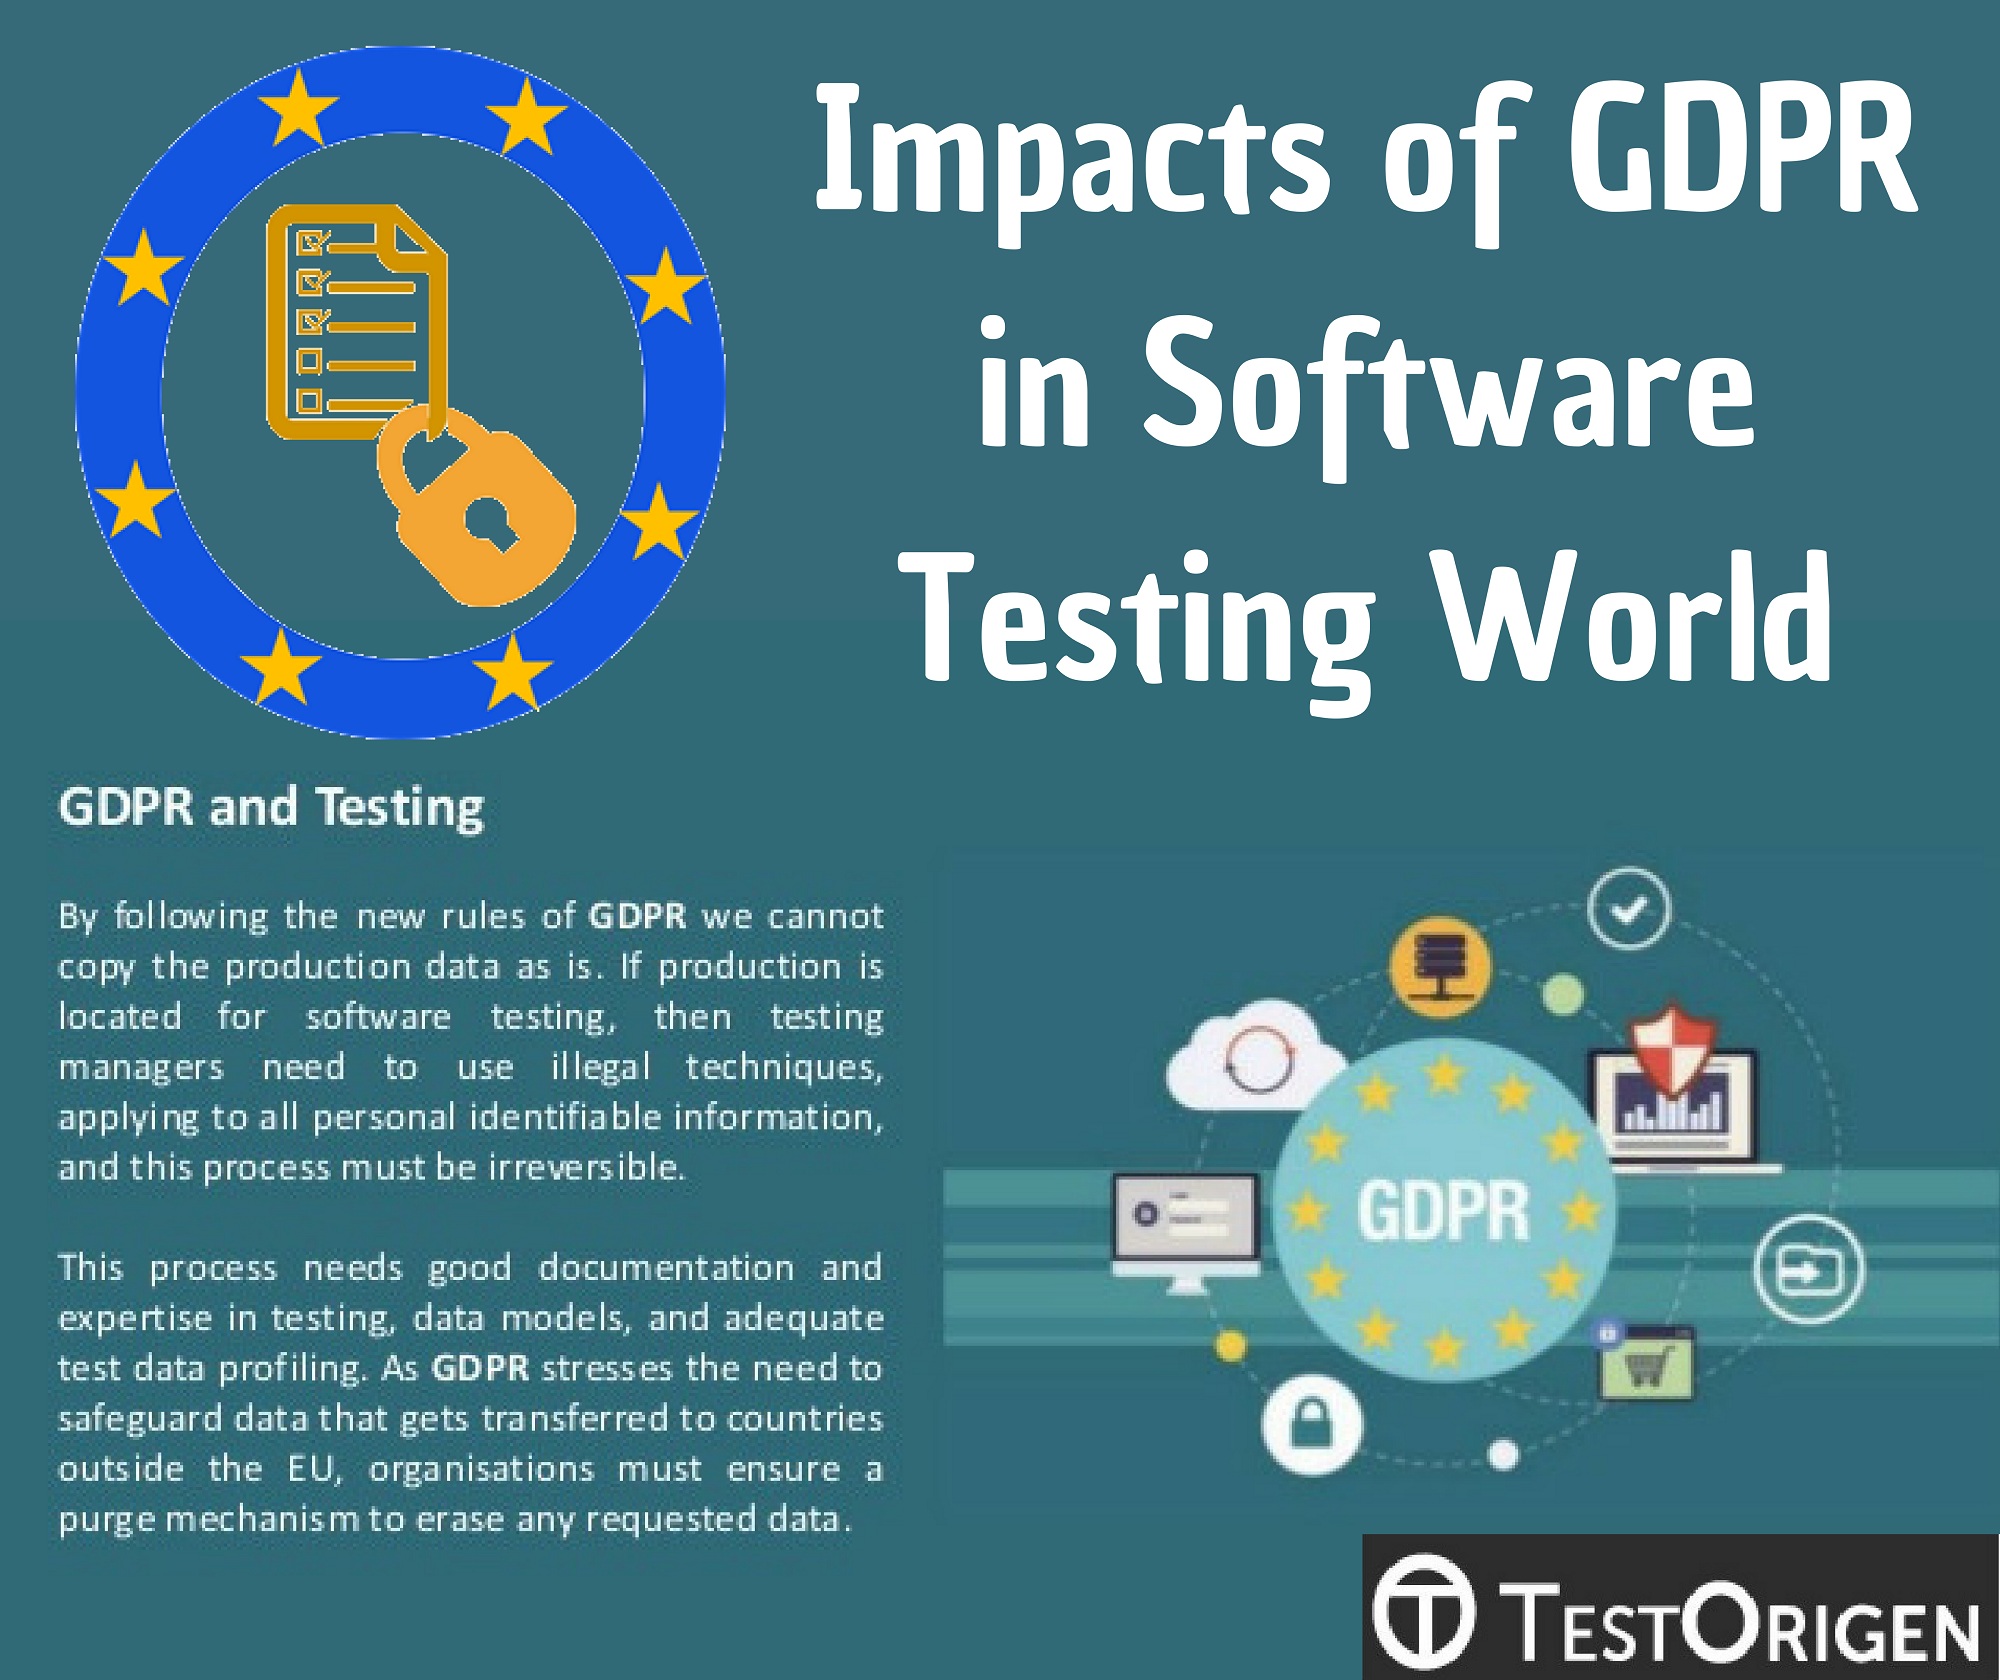 Impacts of GDPR in Software Testing World